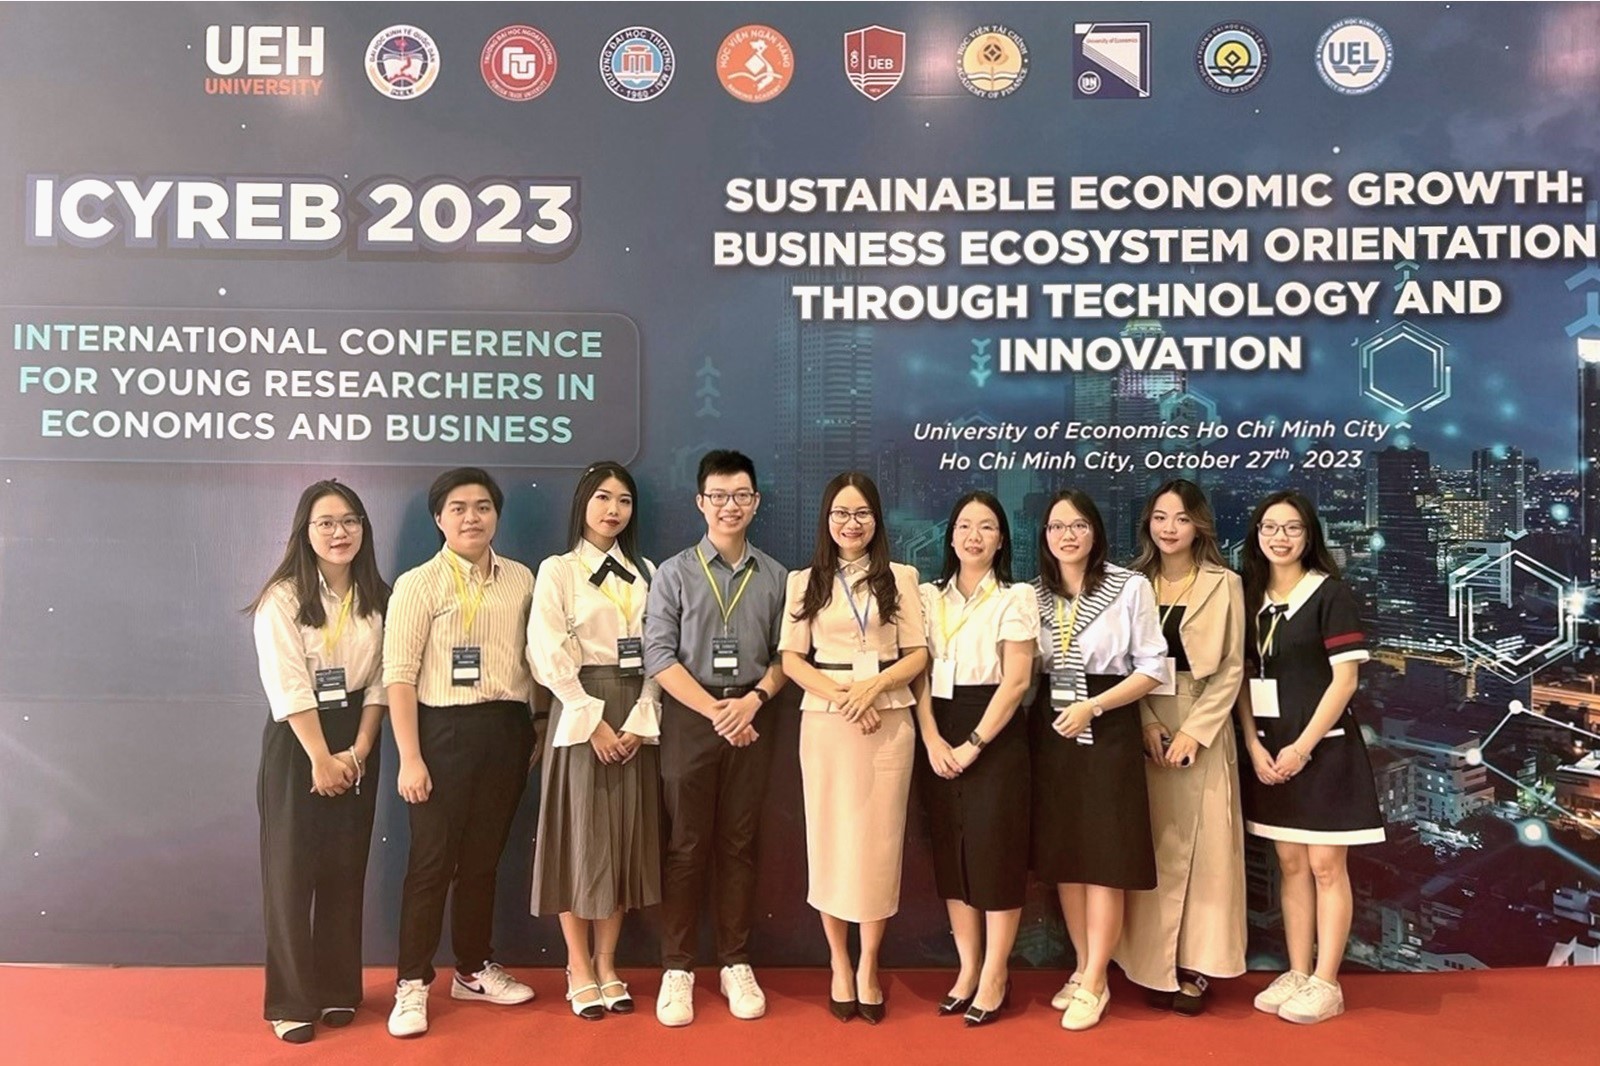 UEB Participates in the International Conference “For Young Researchers in Economics and Business 2023 - ICYREB 2023"